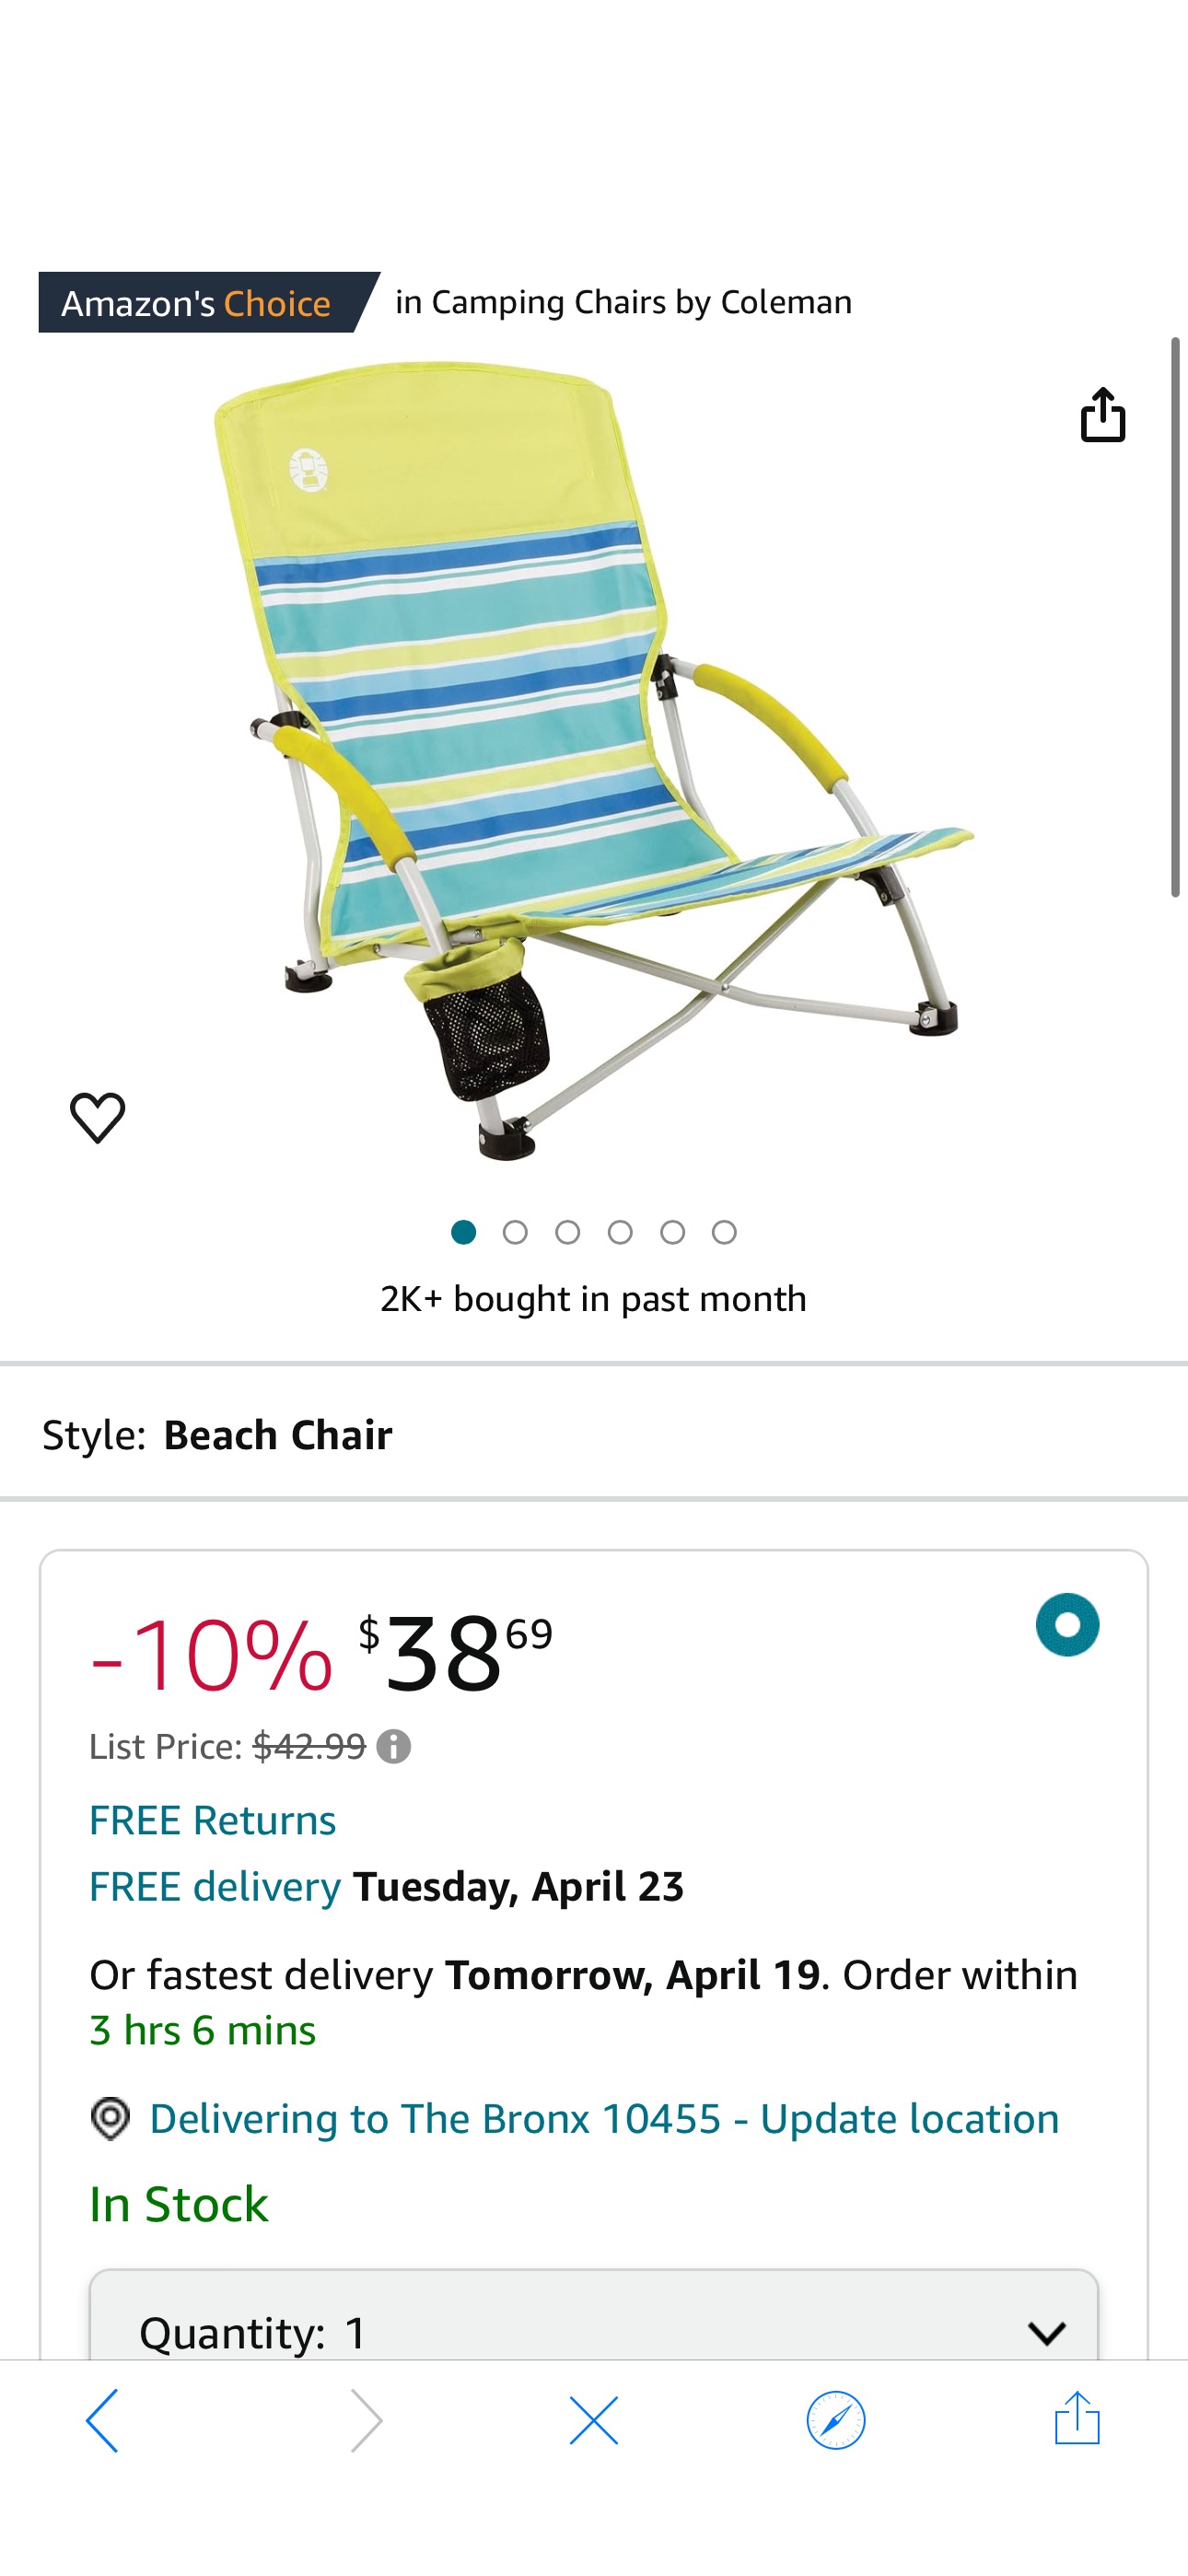 Amazon.com : Coleman Utopia Breeze Beach Chair, Lightweight & Folding Beach Chair with Cup Holder, Seatback Pocket, & Relaxed Design; 21-inch Seat Supports up to 250lbs : Sports & Outdoors